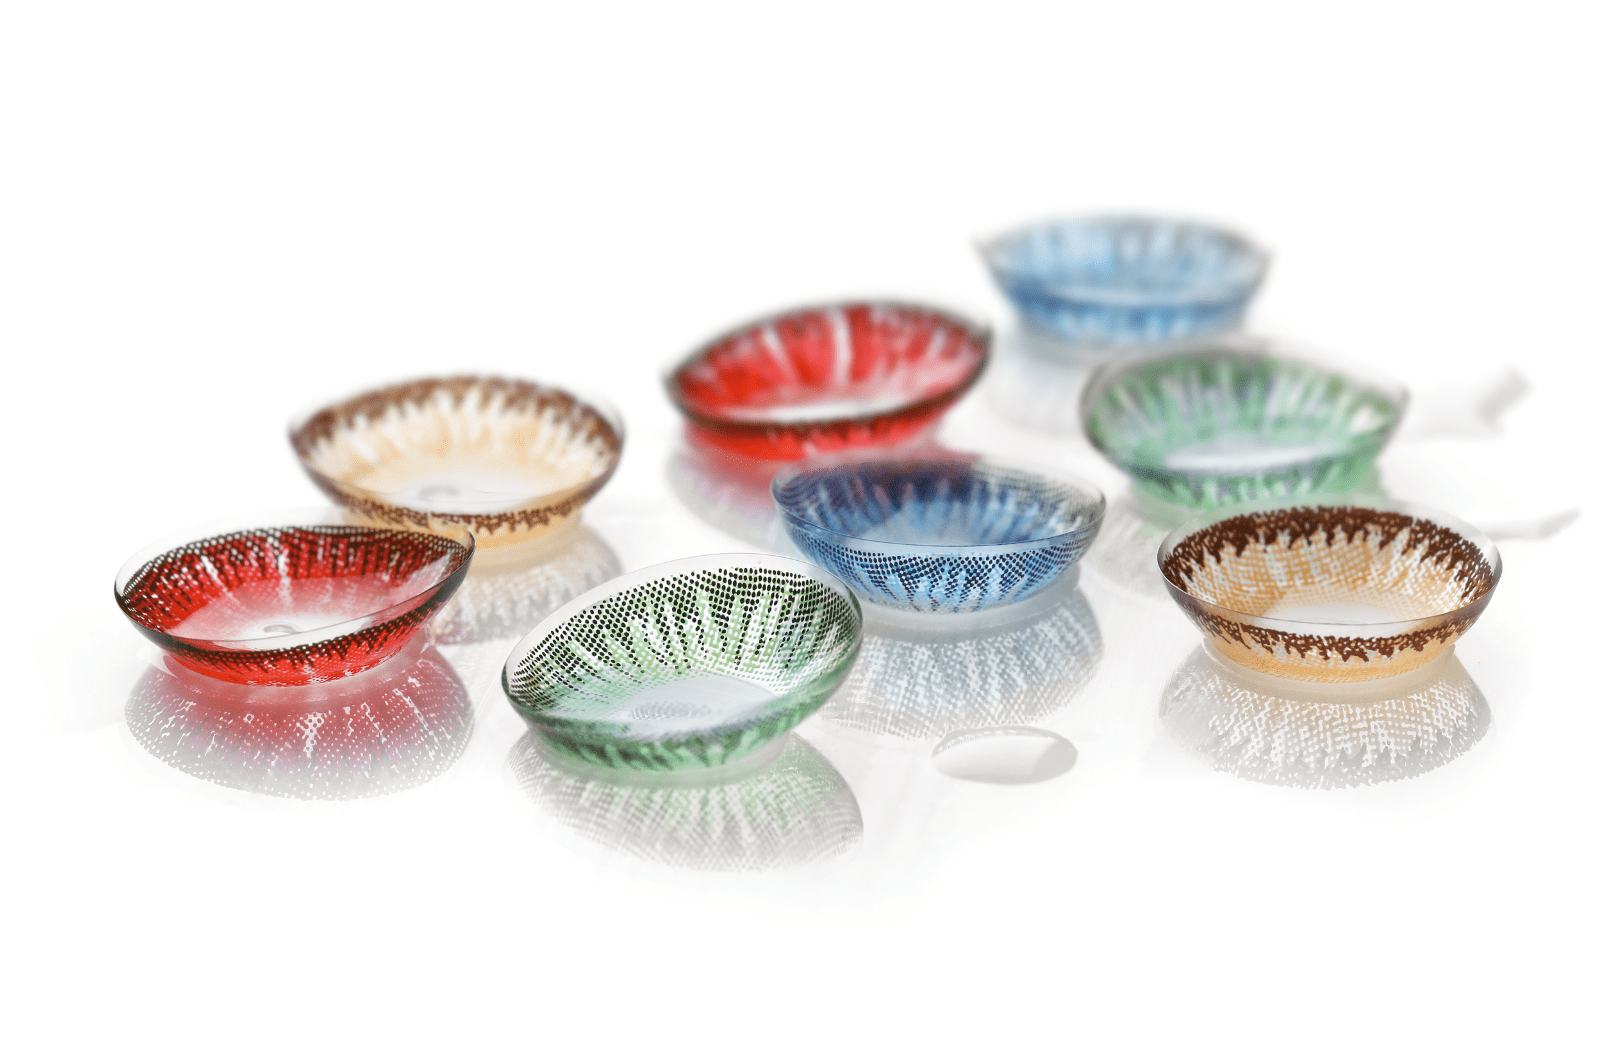 A variety of colored contact lenses sitting out, colors include blue, red, green, and orange